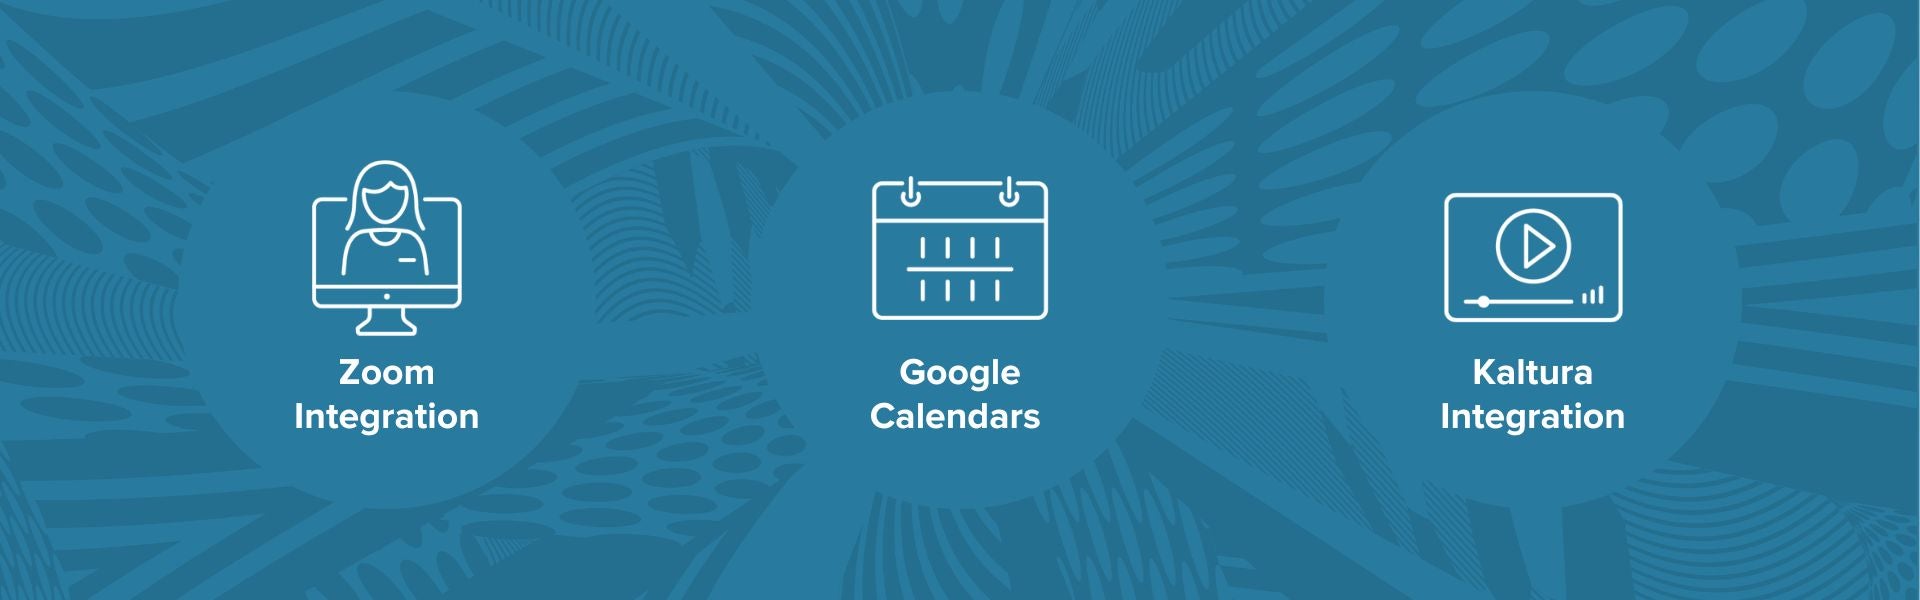 icons of integrations: zoom, google calendars, and Kaltura